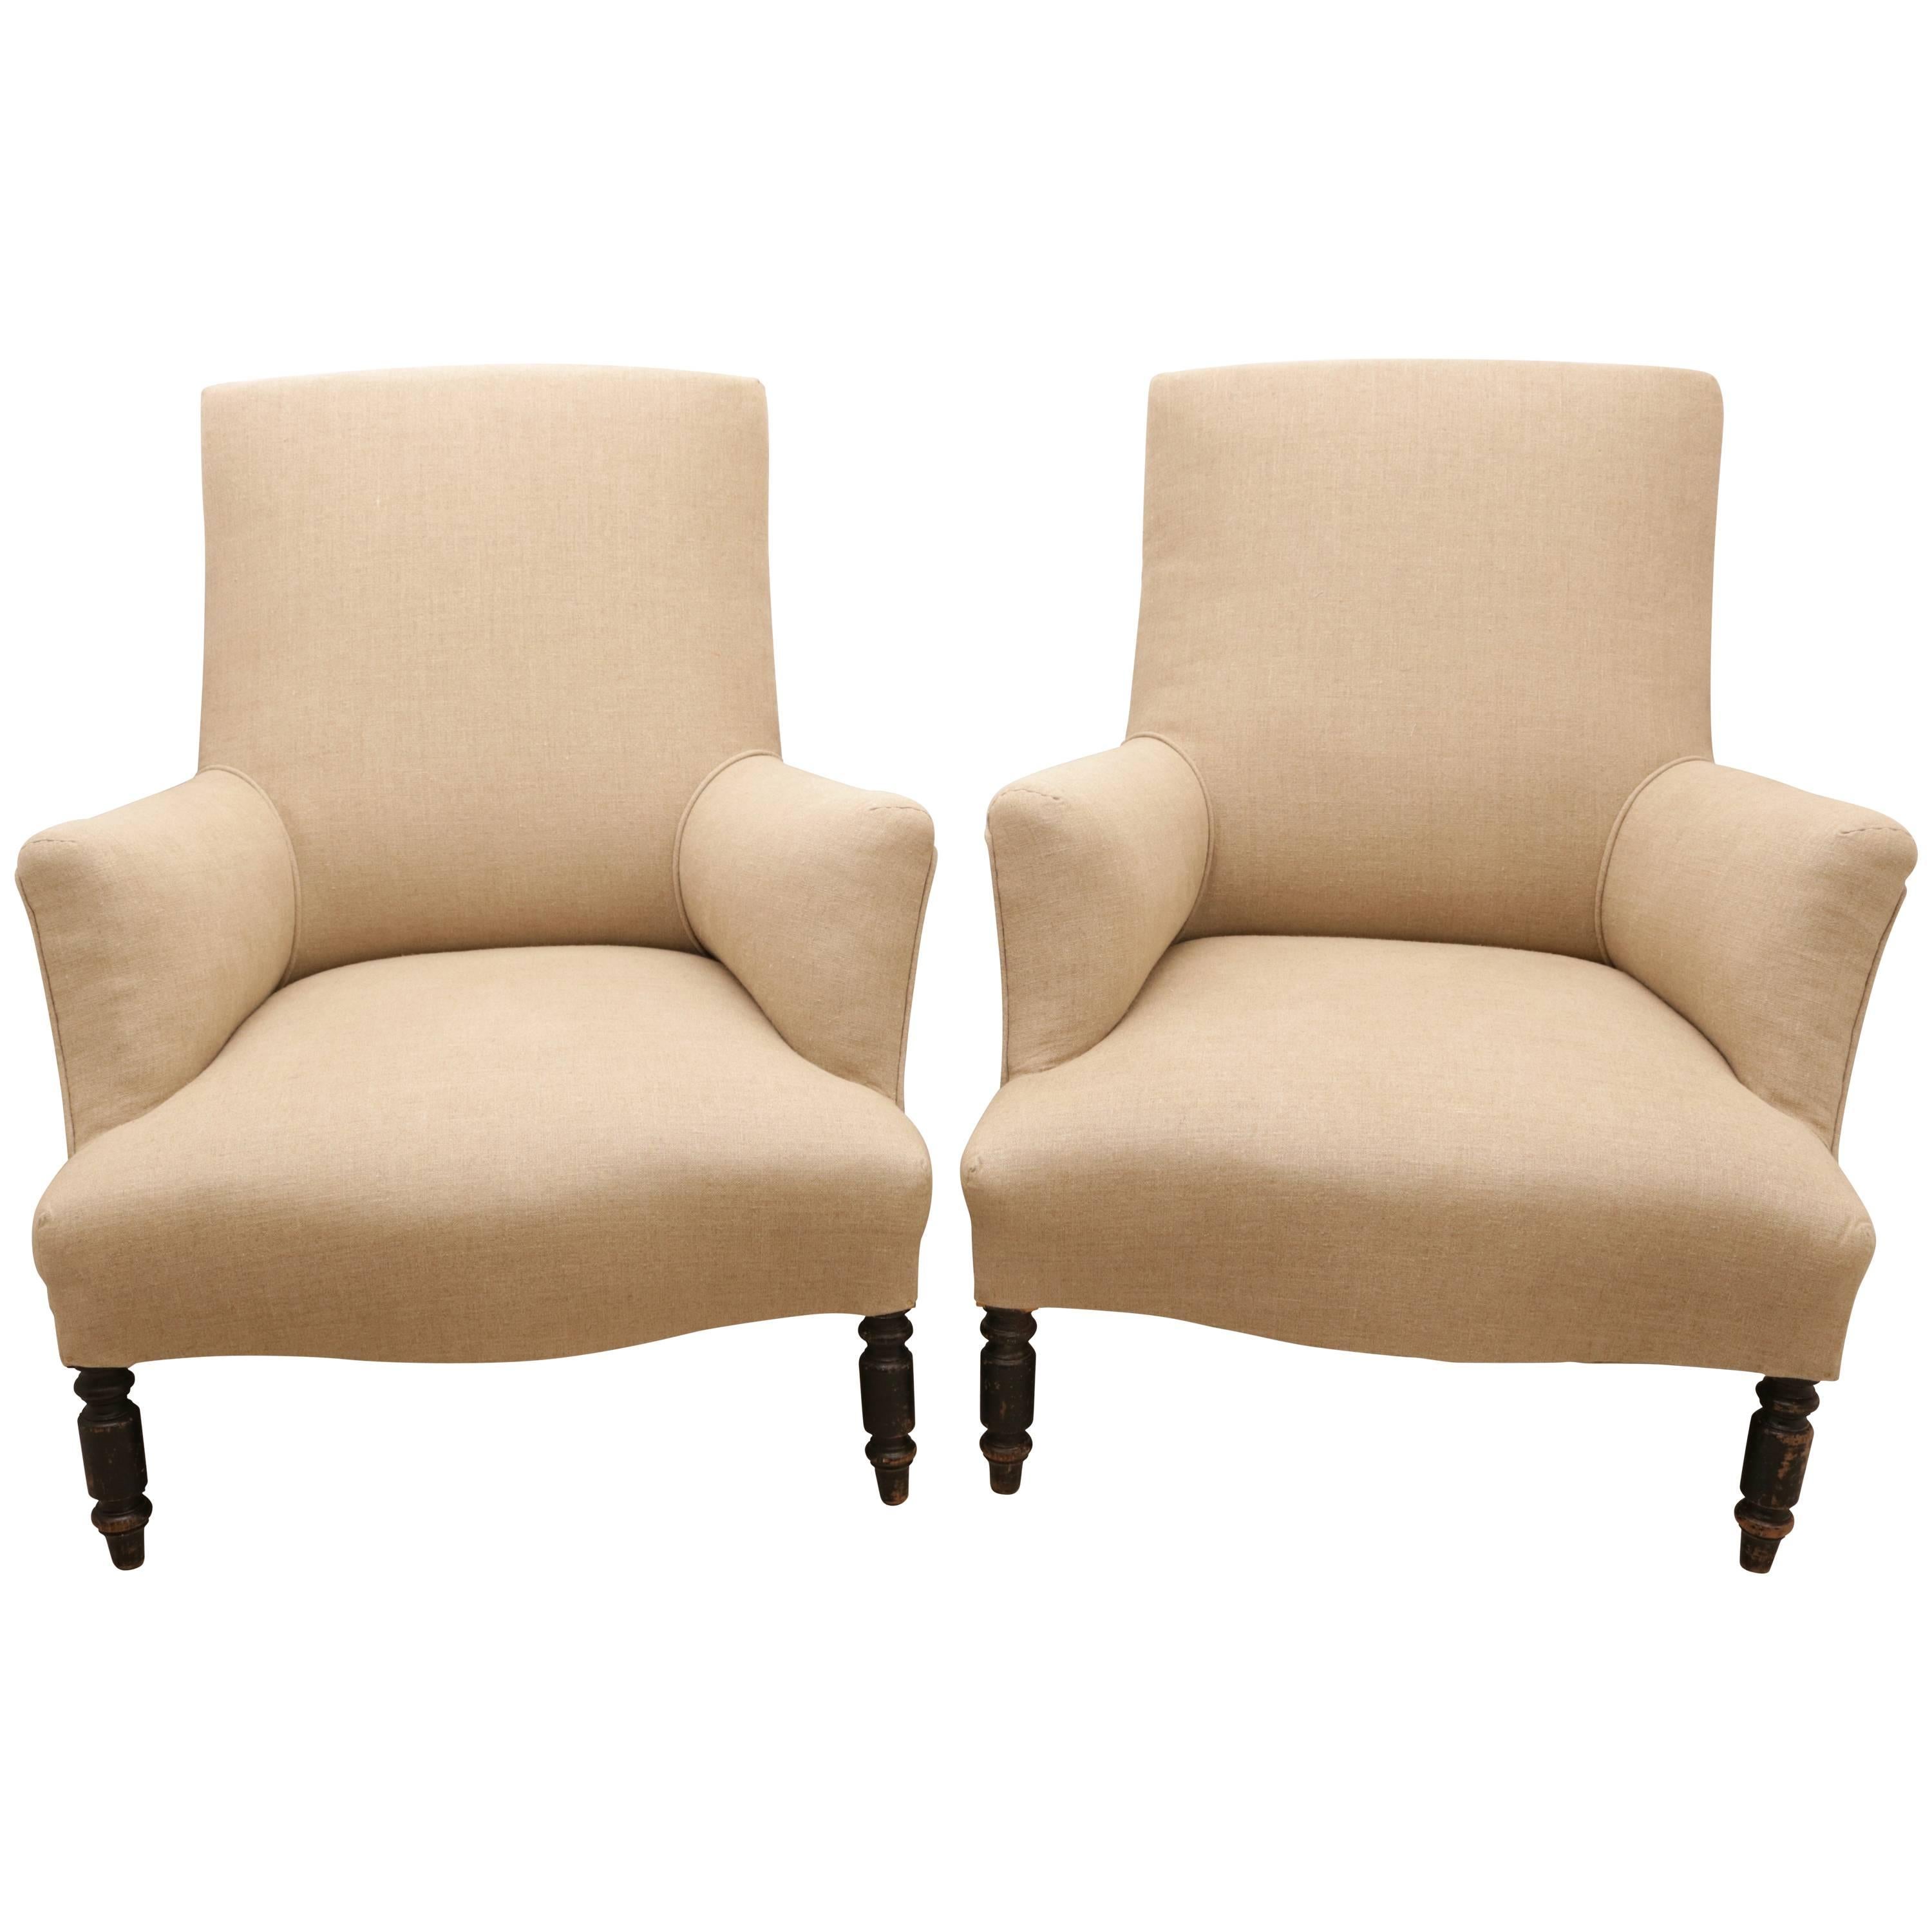 Pair of Napoleon III Upholstered Lounge Chairs in a Tan Linen Fabric